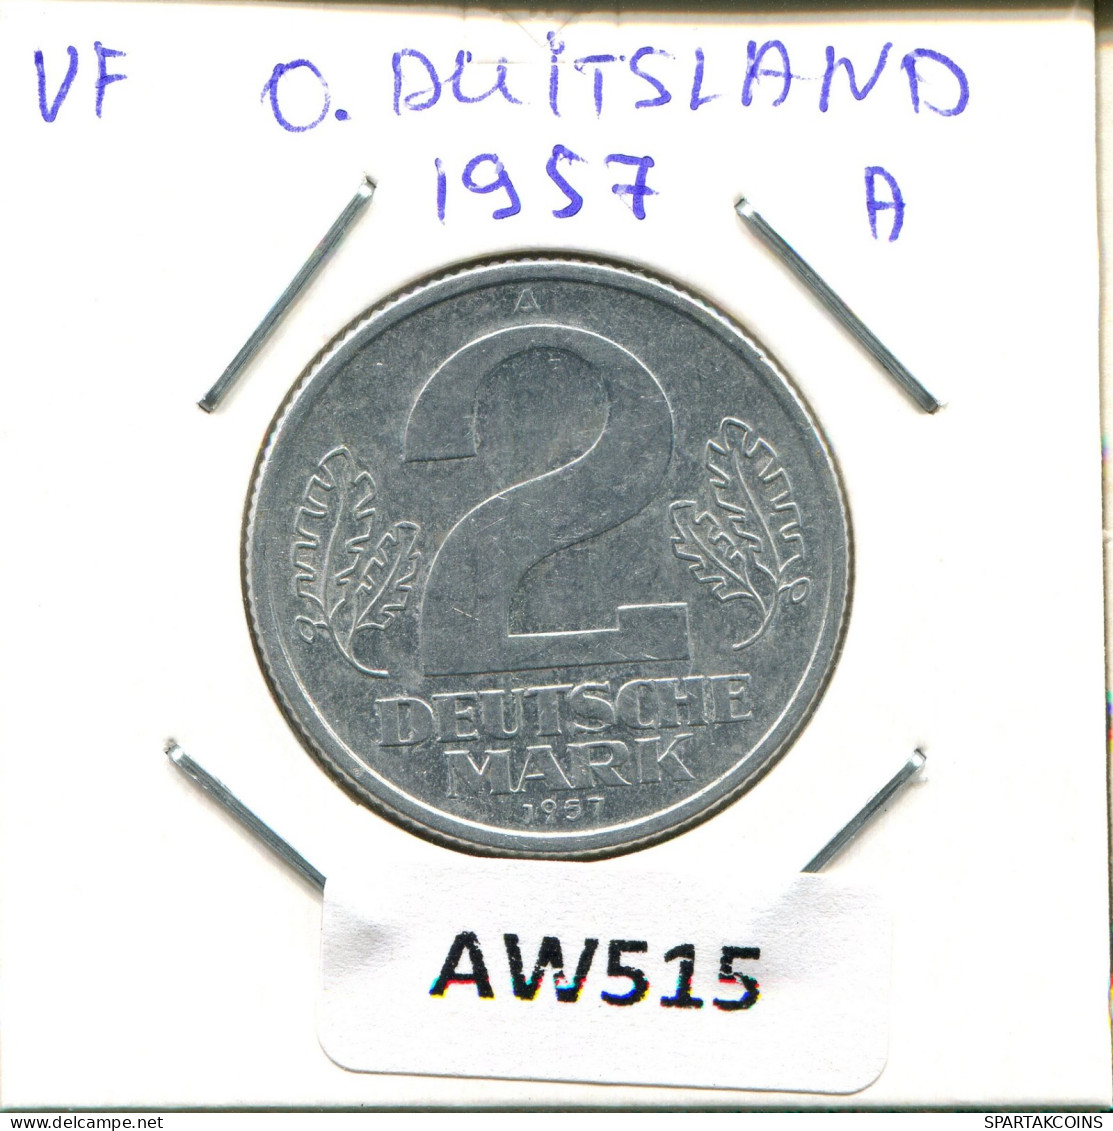 2 DM 1957 A DDR EAST GERMANY Coin #AW515.U.A - 2 Marchi